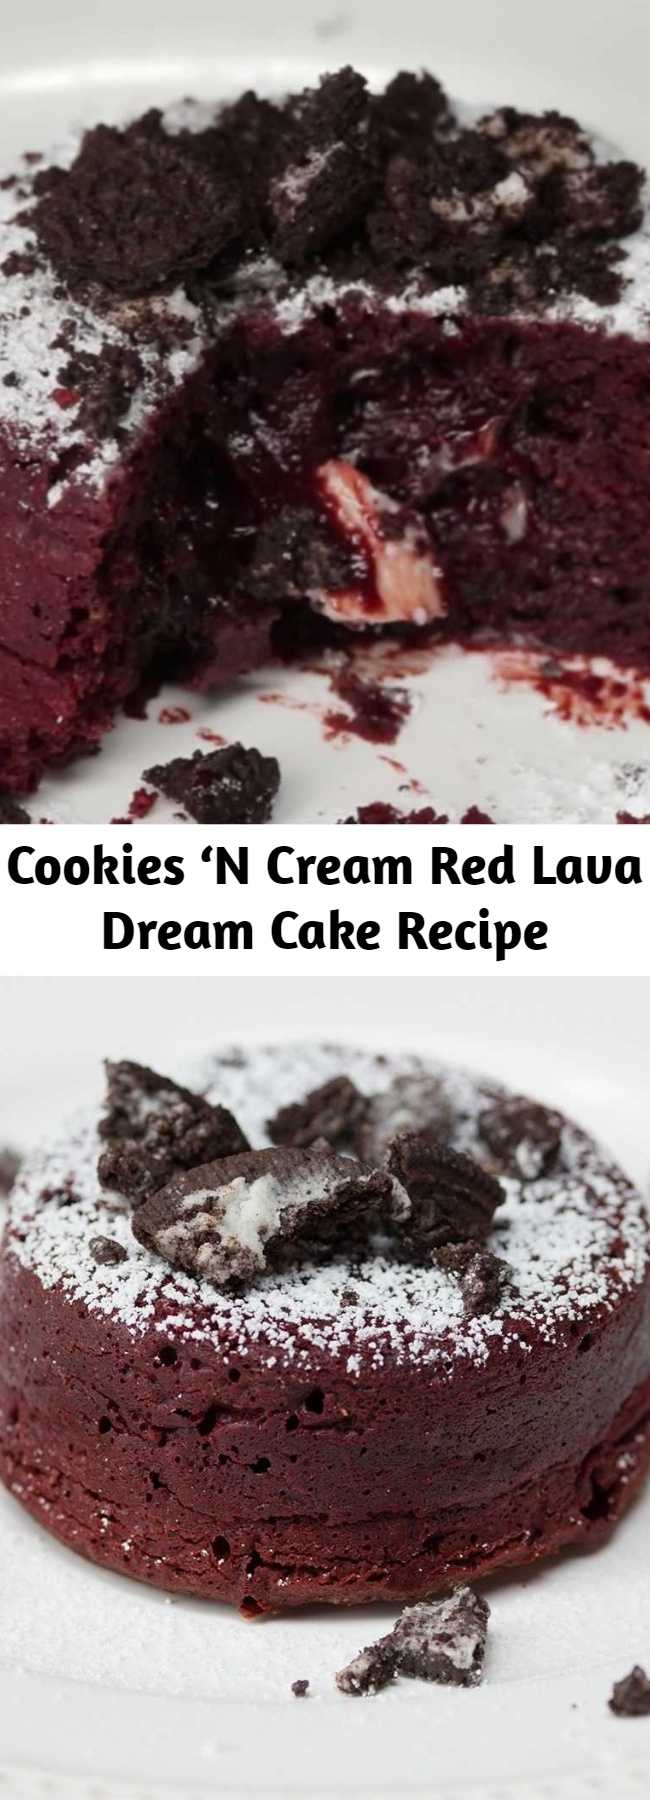 Cookies ‘N Cream Red Lava Dream Cake Recipe - Rich and gooey mini lava cakes are a sweet dream come true for chocolate lovers.